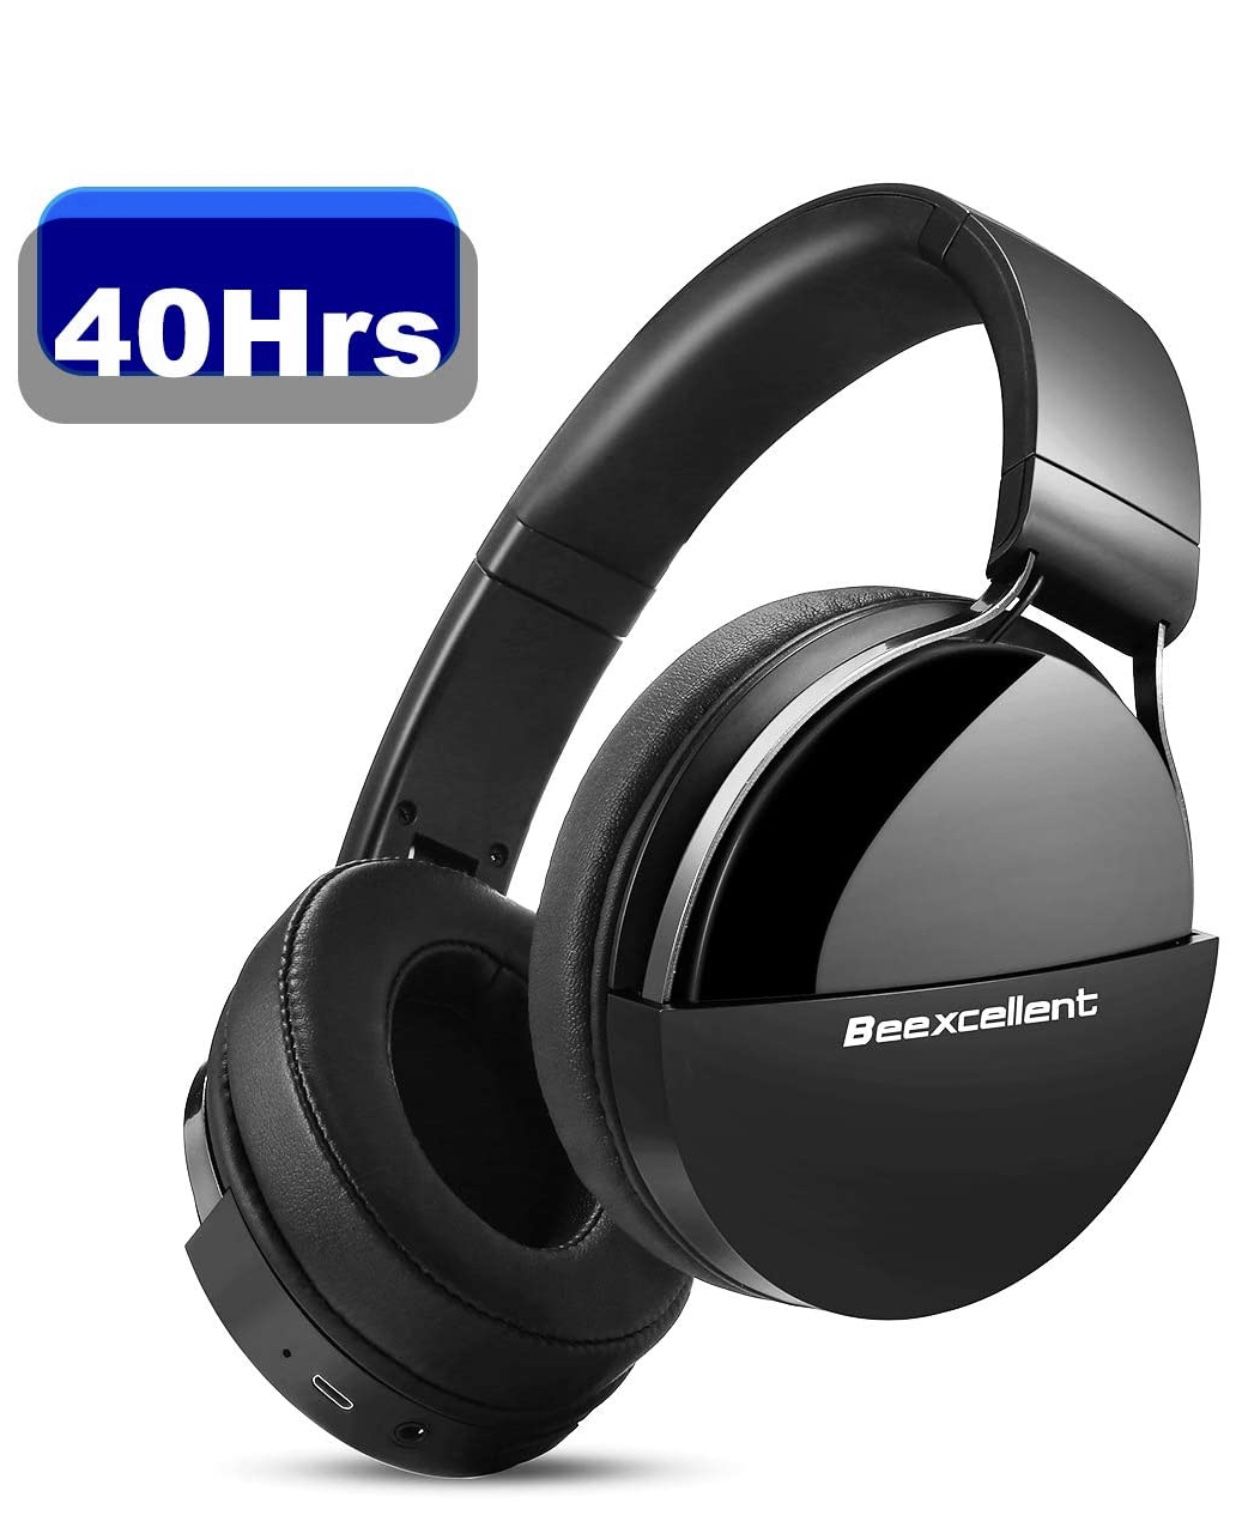 Beexcellent Wireless Bluetooth Headphones, 40 Hours HiFi Stereo Bluetooth 5.0 CVC 6.0 Over Ear Headphones with Build-in Mic, for iPhone Samsung Huawe